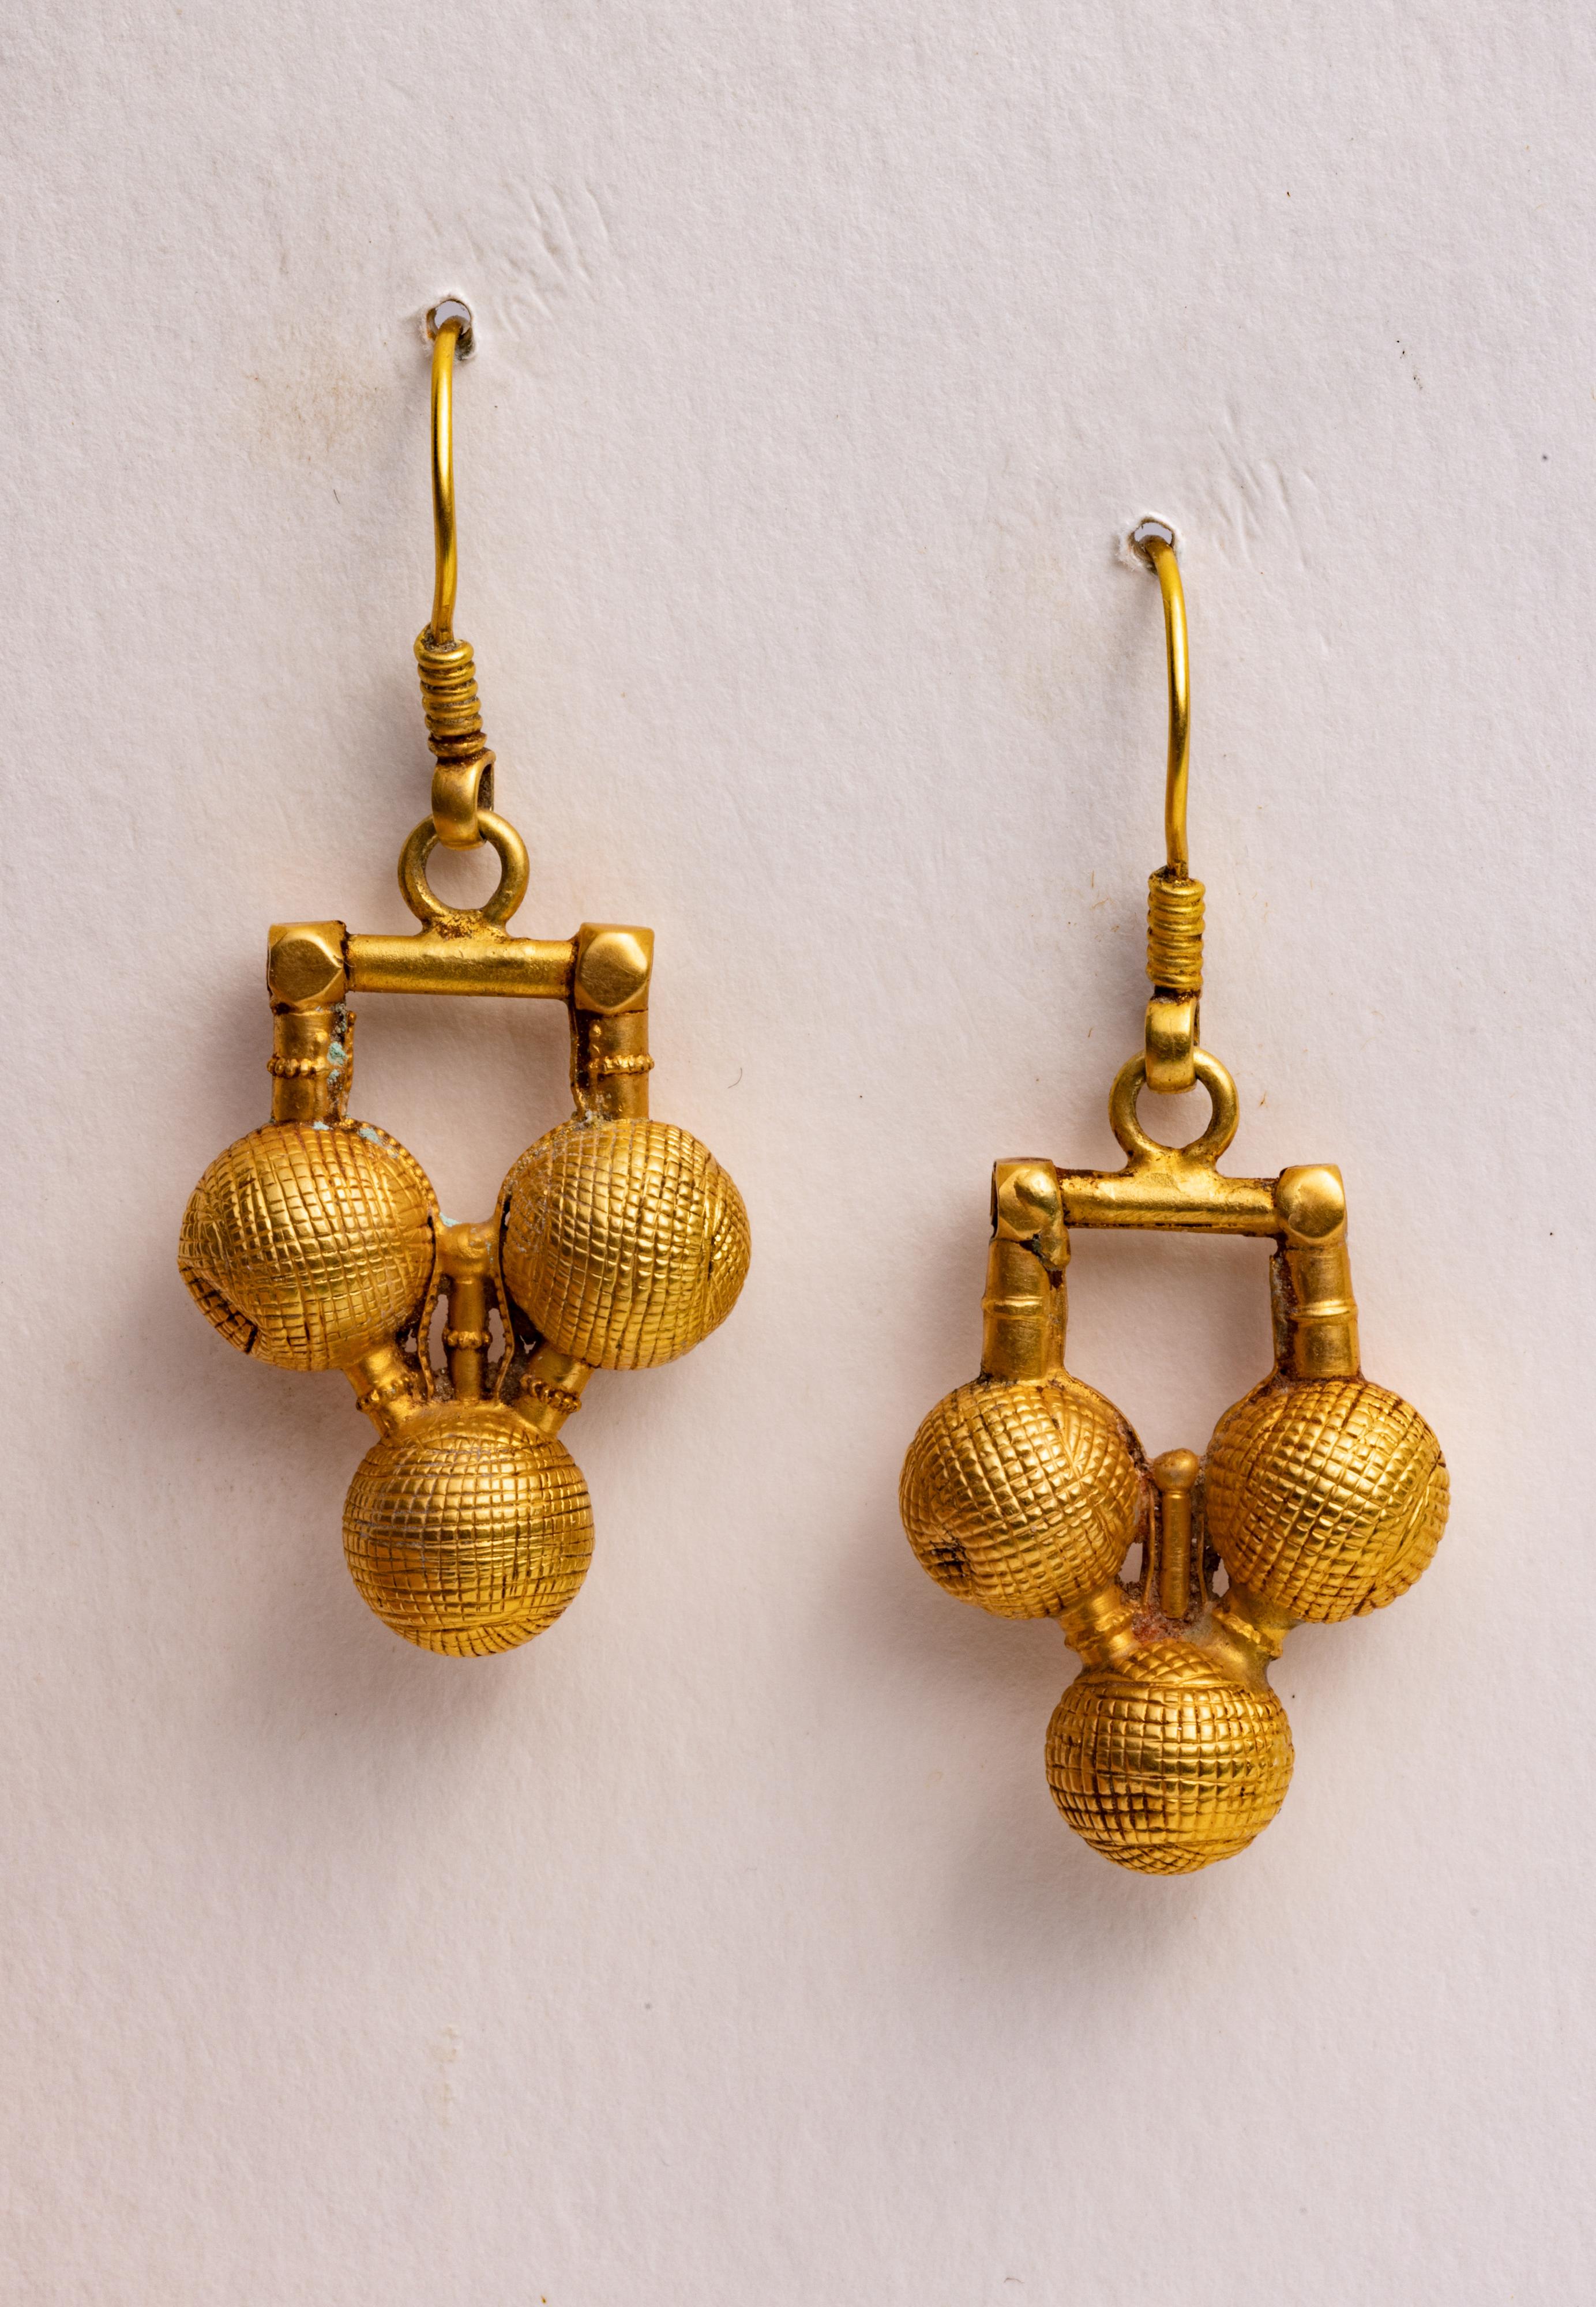 A pair of 18K gold South Indian dangle drop earrings hand-tooled testured design using the lost wax method.  French wire for pierced ears.  

The fine jewelry collection is sourced, designed or created by Deborah Lockhart Phillips. Through her